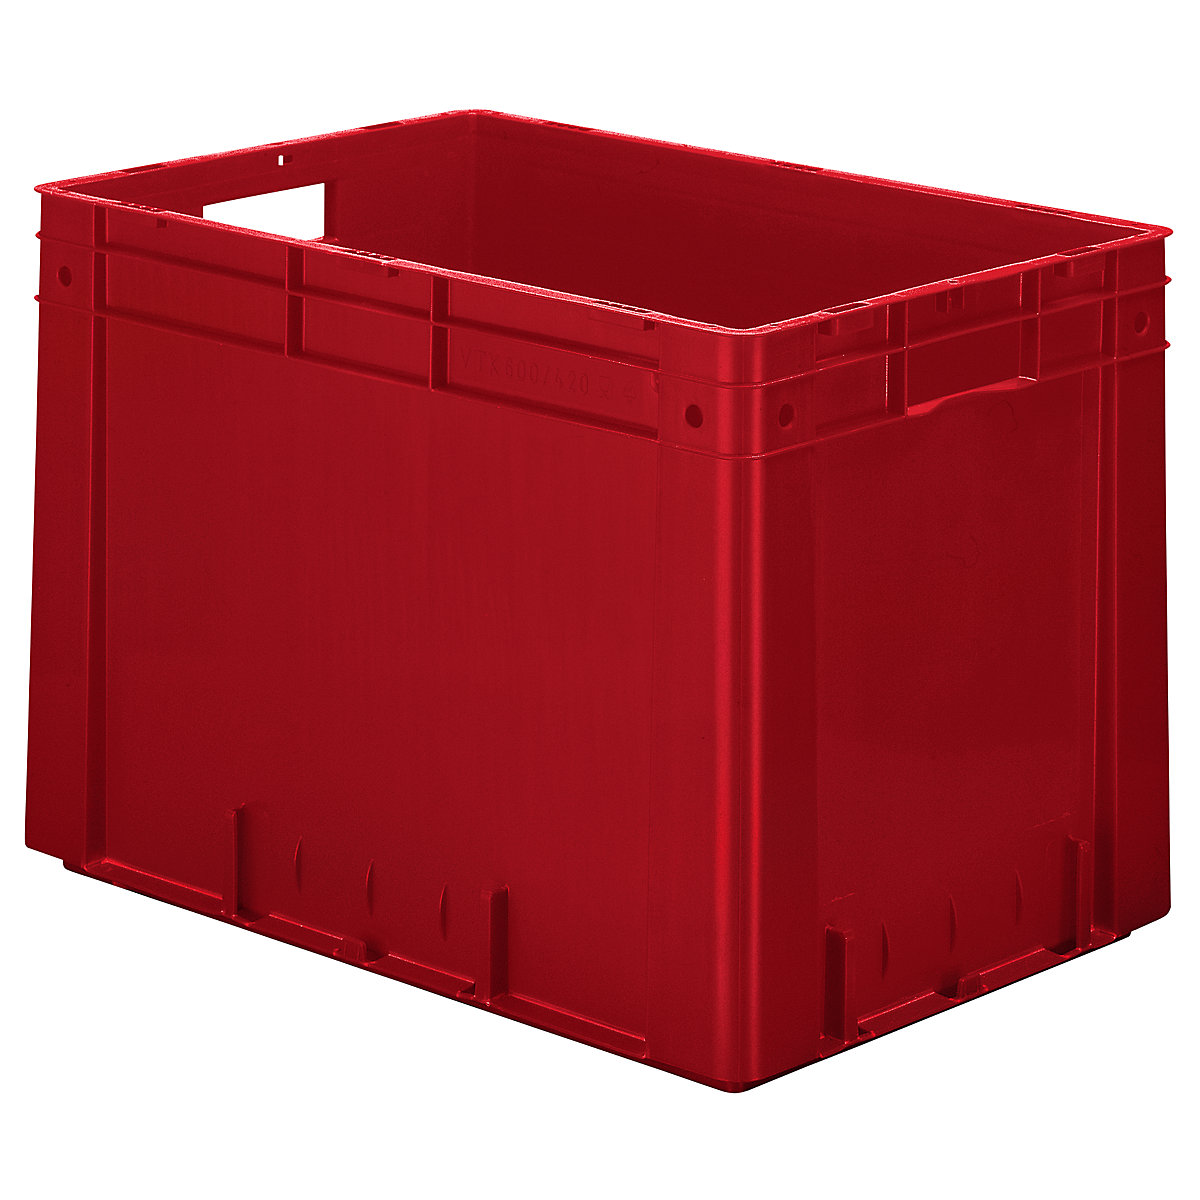 Heavy duty Euro container, polypropylene, capacity 80 l, LxWxH 600 x 400 x 420 mm, solid walls, solid base, red, pack of 2